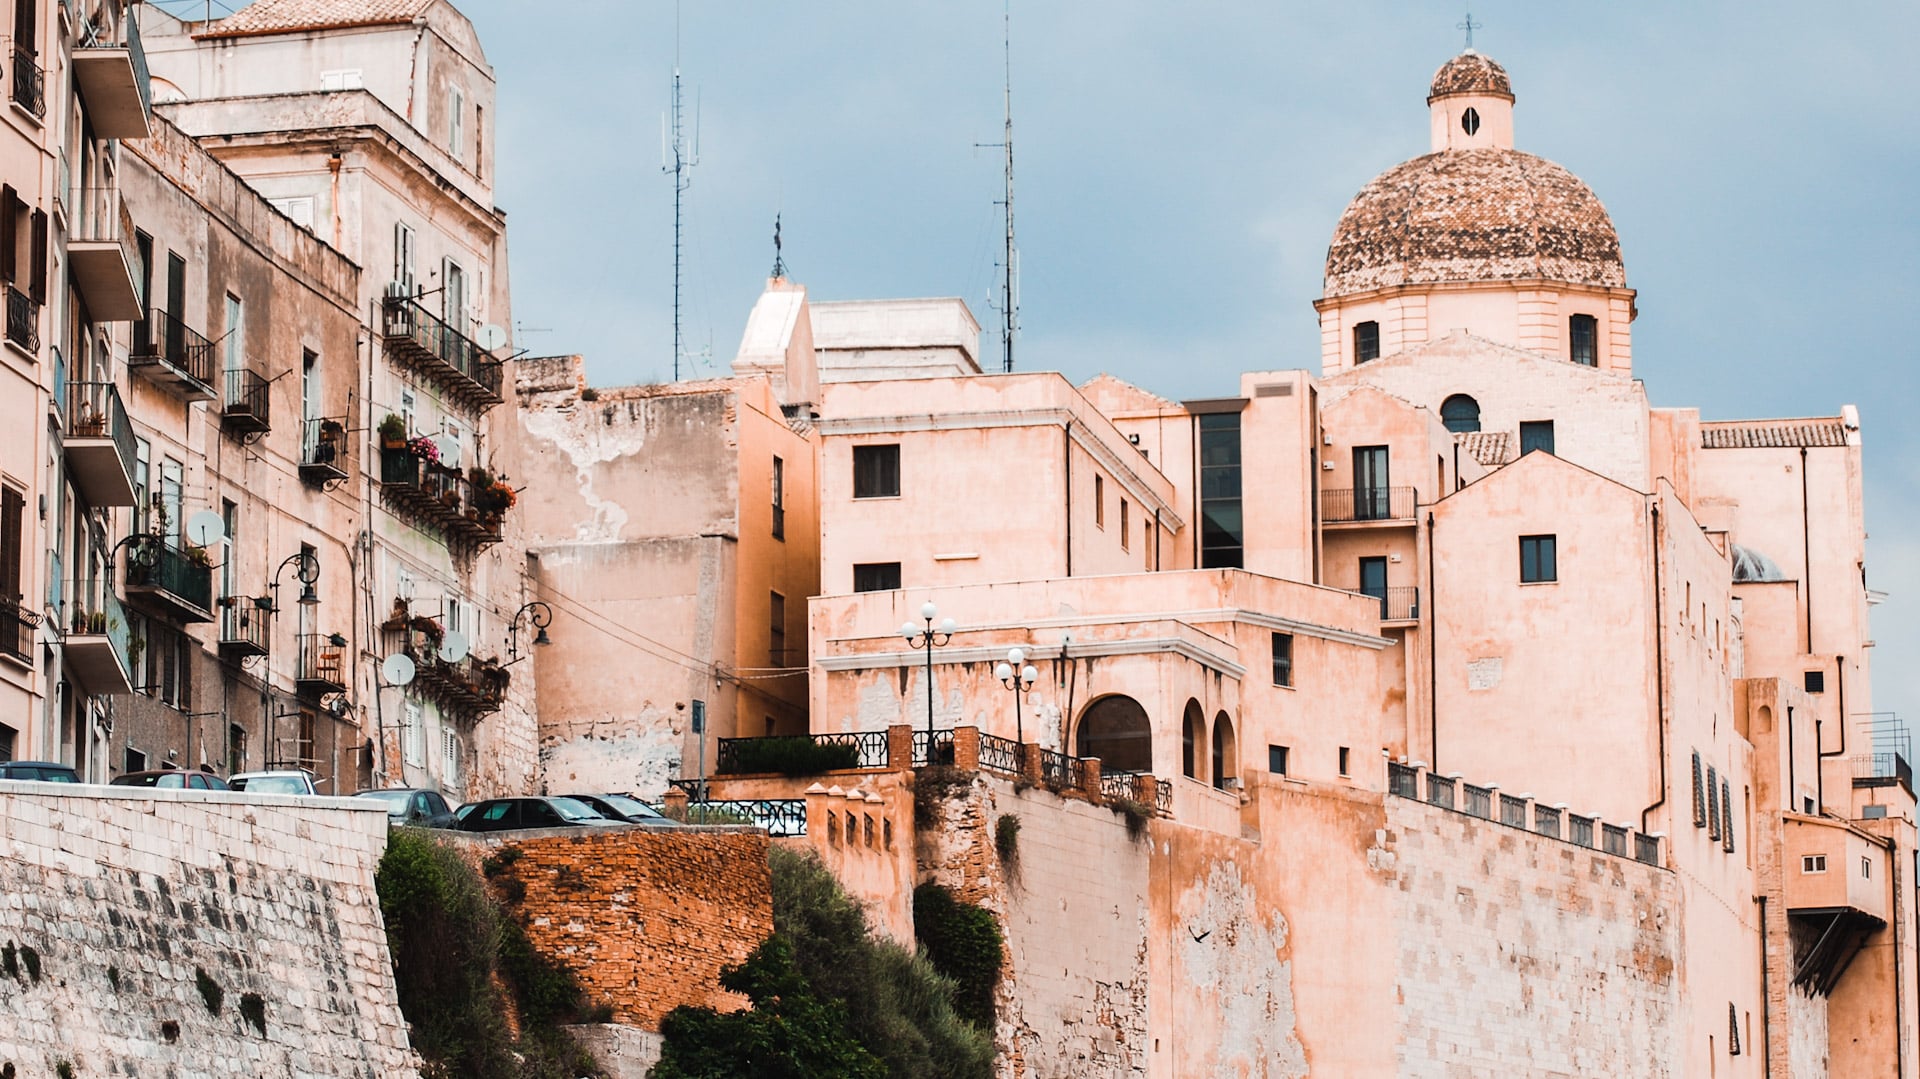 Situated in Cagliari's historic center, Castello is a quaint neighborhood characterized by its narrow cobblestone streets and ancient fortifications.